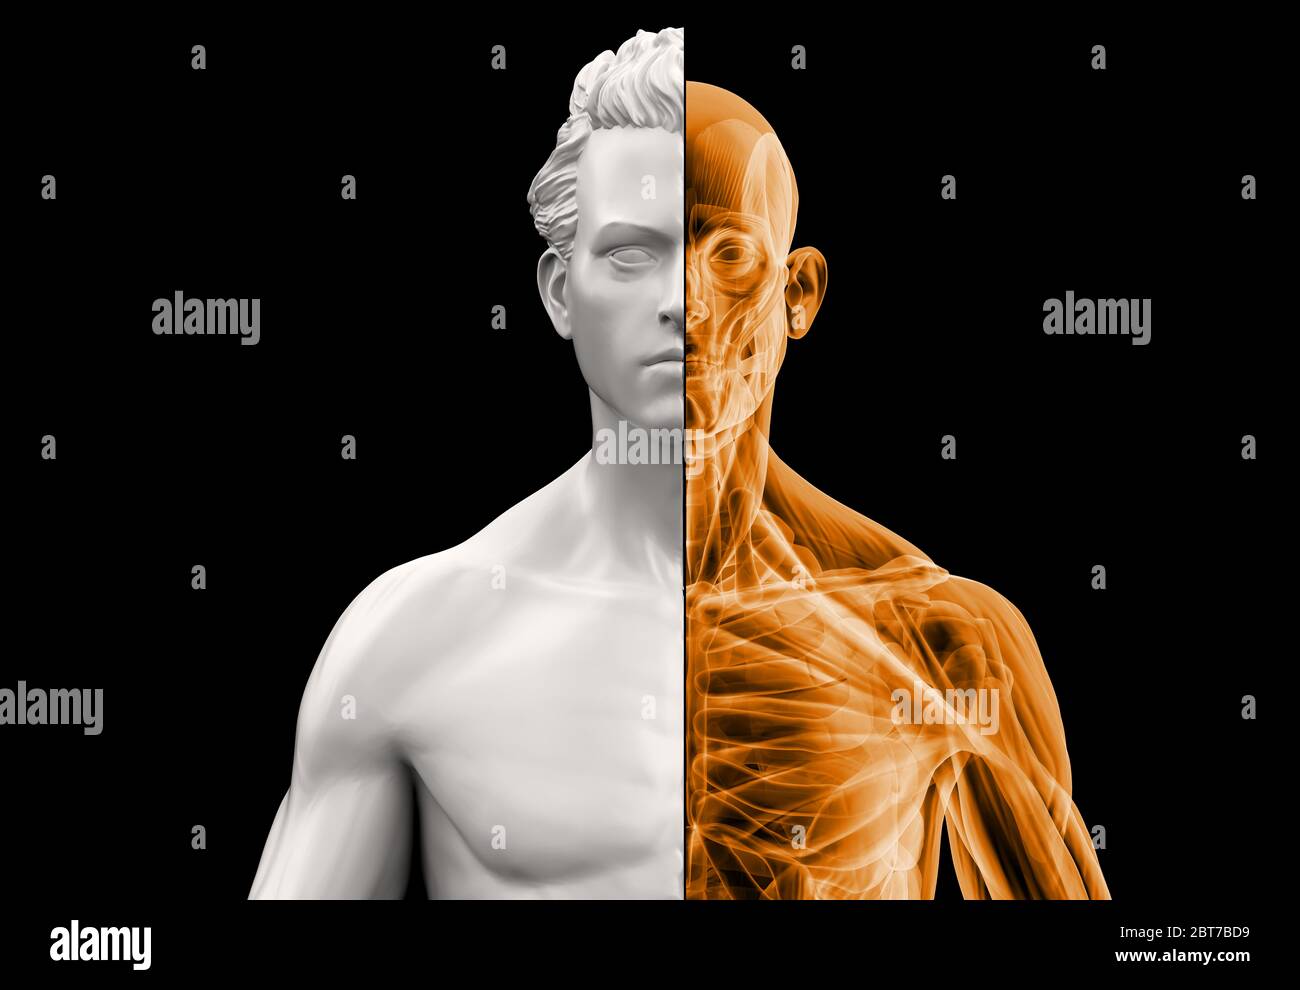 Anatomy man bust half x-ray and half in clay. 3d illustration on black background. Stock Photo